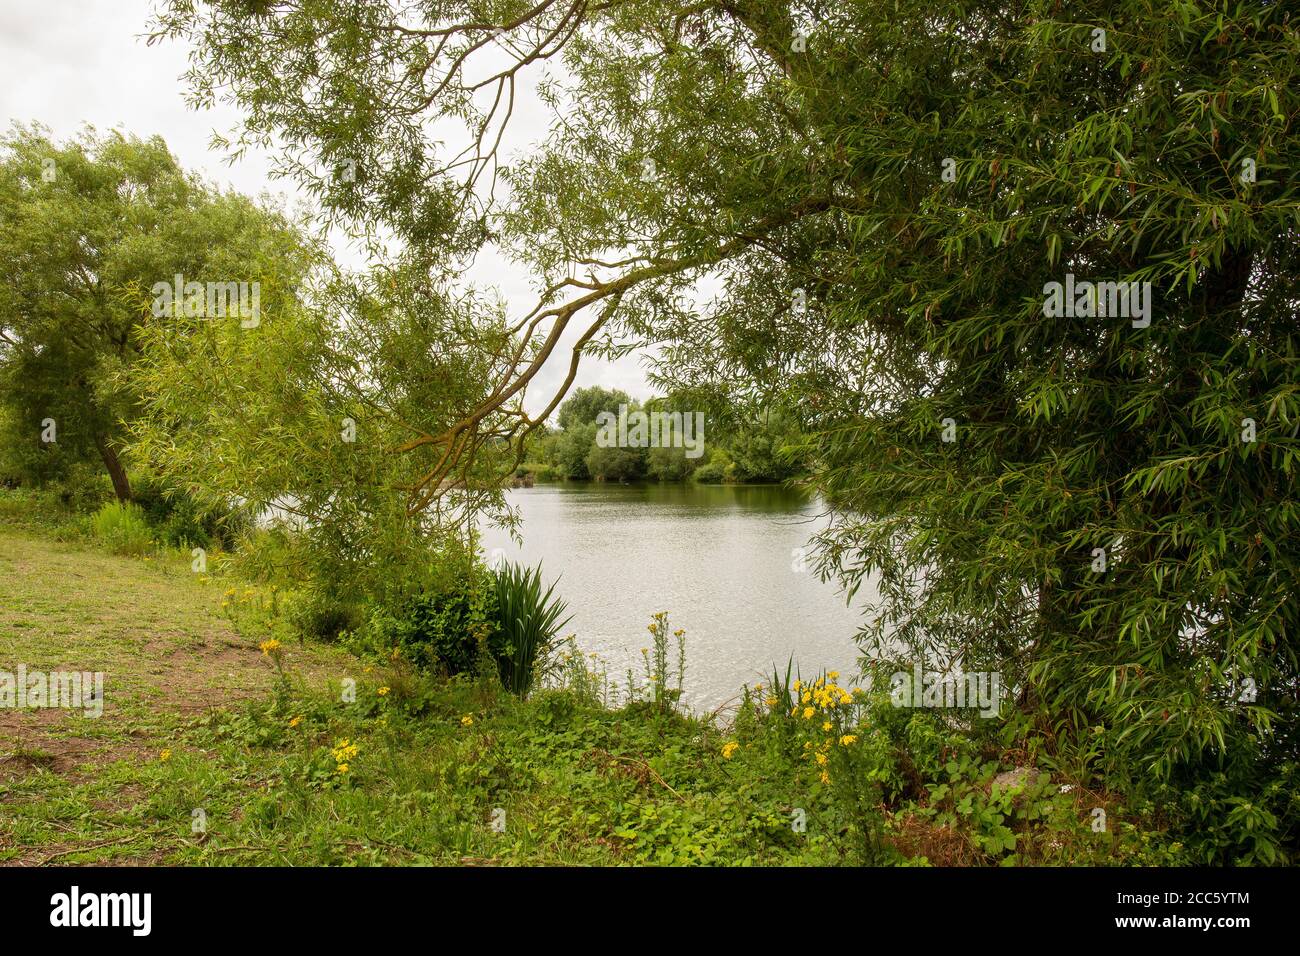 Serene English lakeside view on a summer day through willow trees, Concept of lonely natural area. Stock Photo